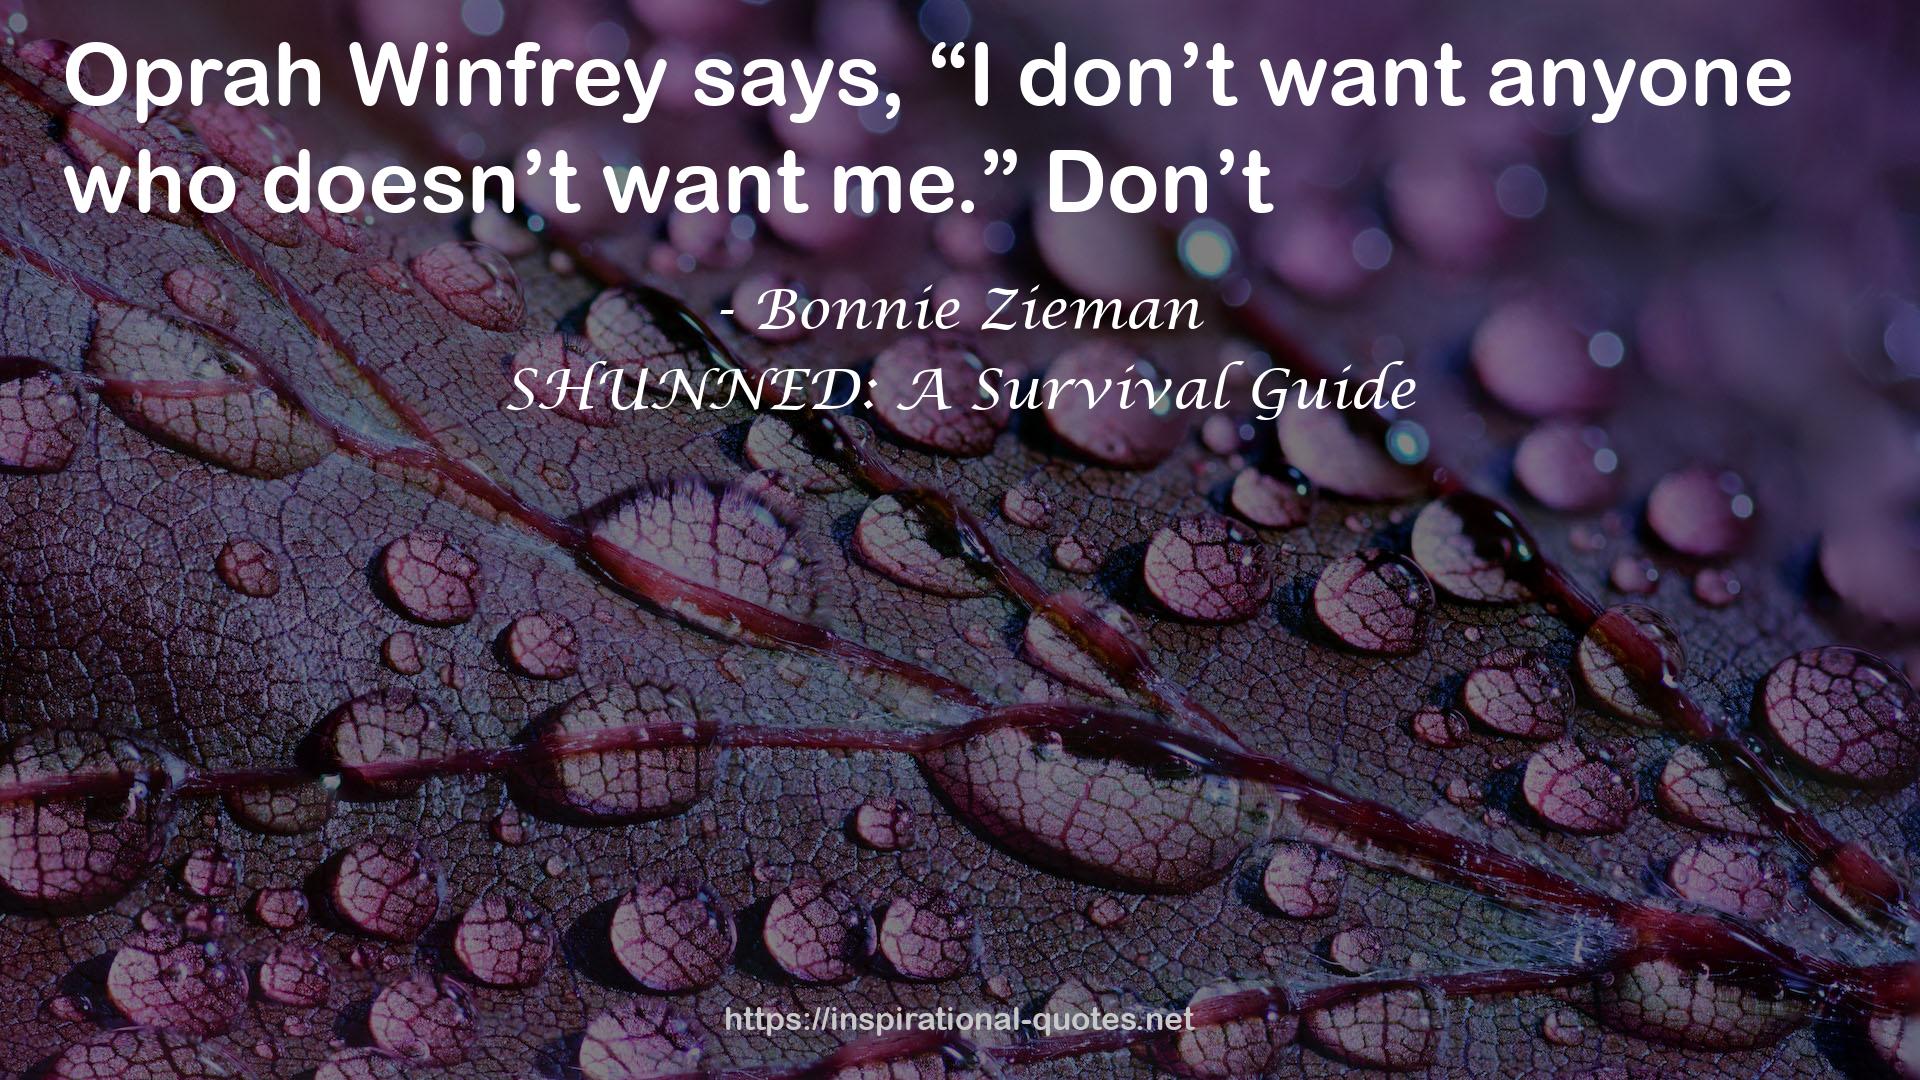 SHUNNED: A Survival Guide QUOTES